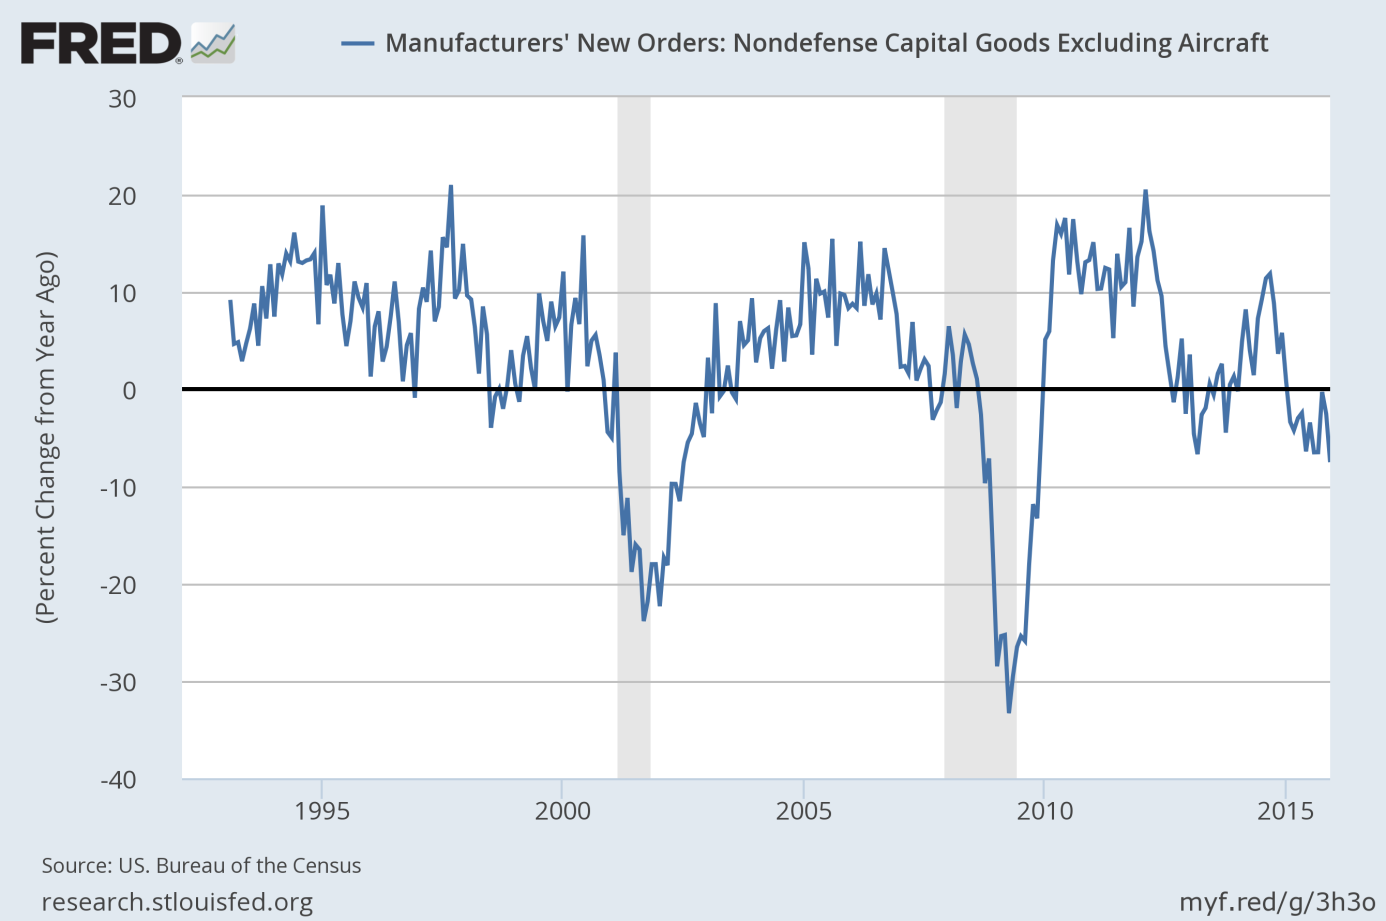 Manufacturer’s New Orders for Core Durable Goods from 1992 to 2015.